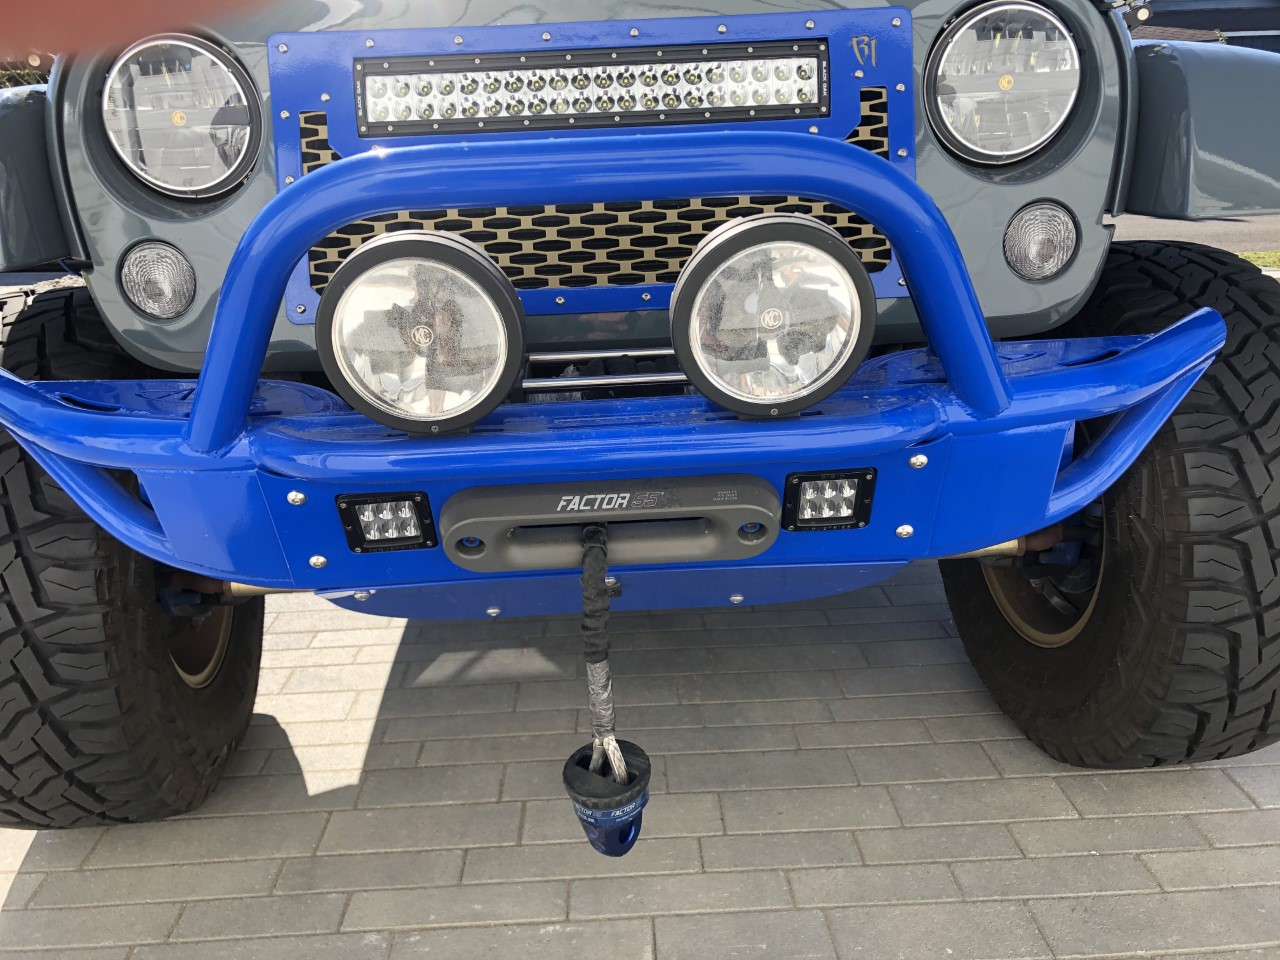 Exterior Body Parts - Jeep JK front and rear matching ADD bumpers - Used - 2007 to 2019 Jeep Wrangler - La, CA 90277, United States